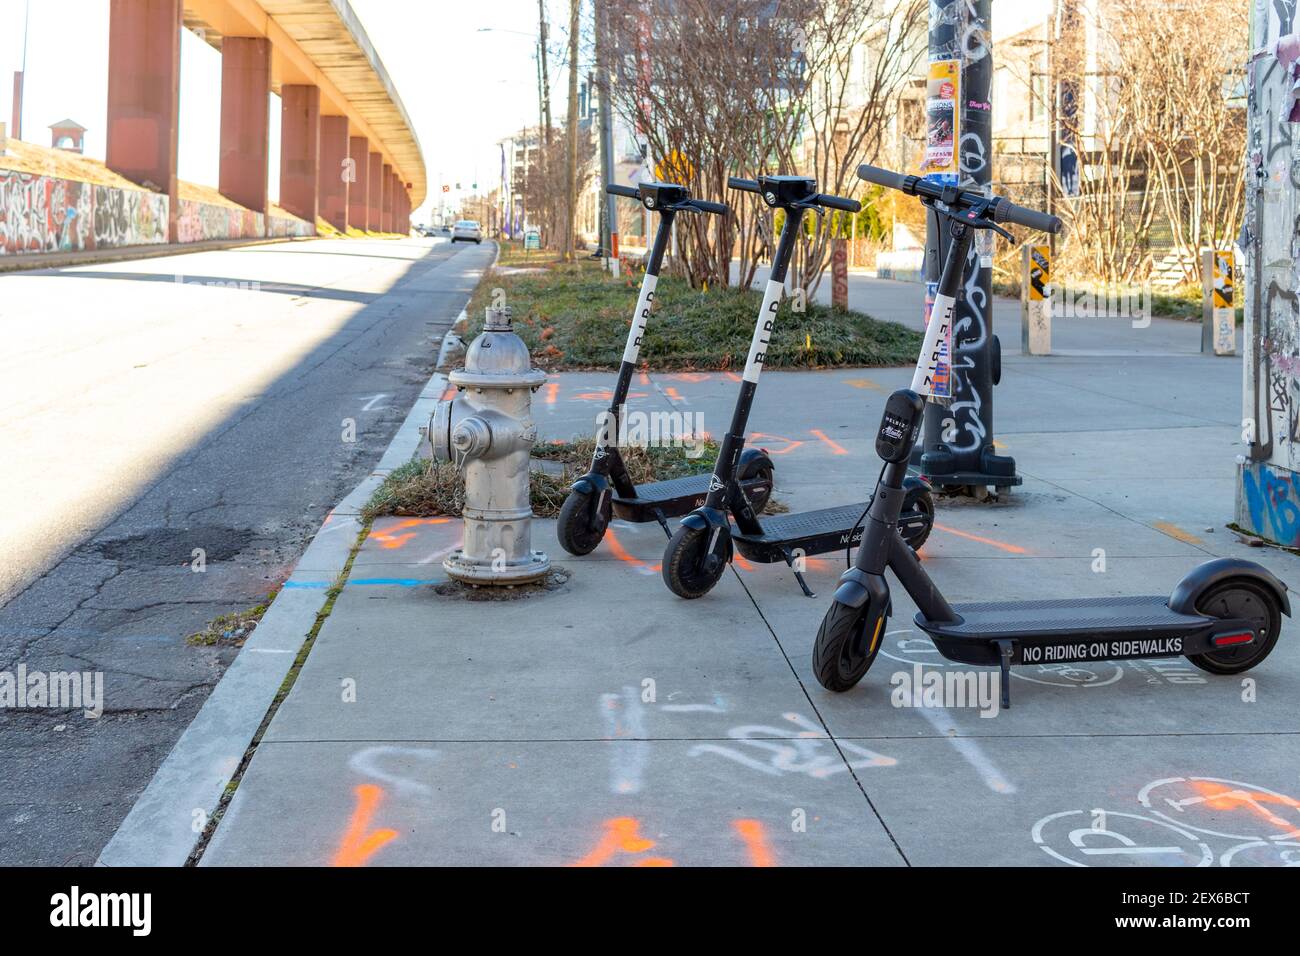 Atlanta, USA - Jan 18th 2021: City bikes available to rent to encourage people to use alternative transportation that is good for health and the envir Stock Photo